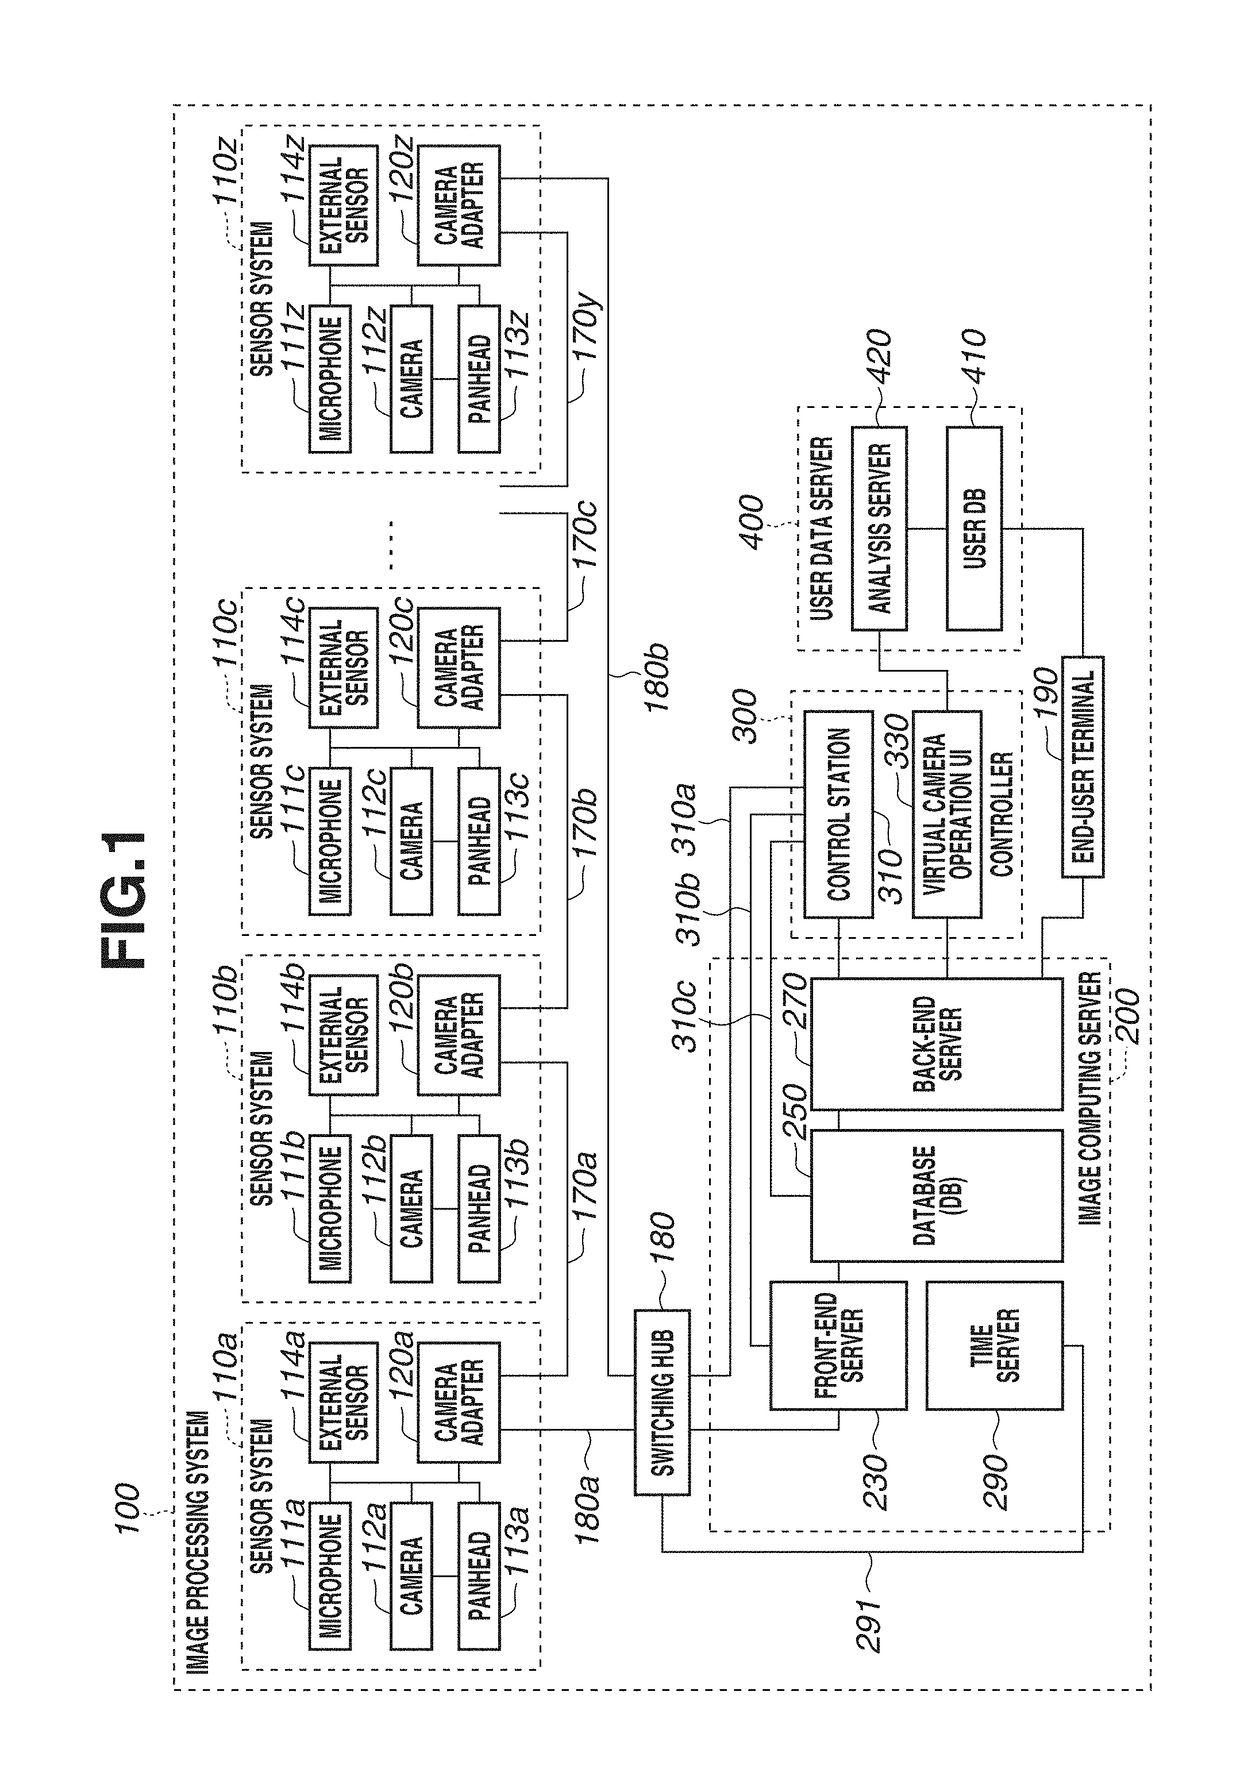 Image processing apparatus for generating virtual viewpoint image and method therefor